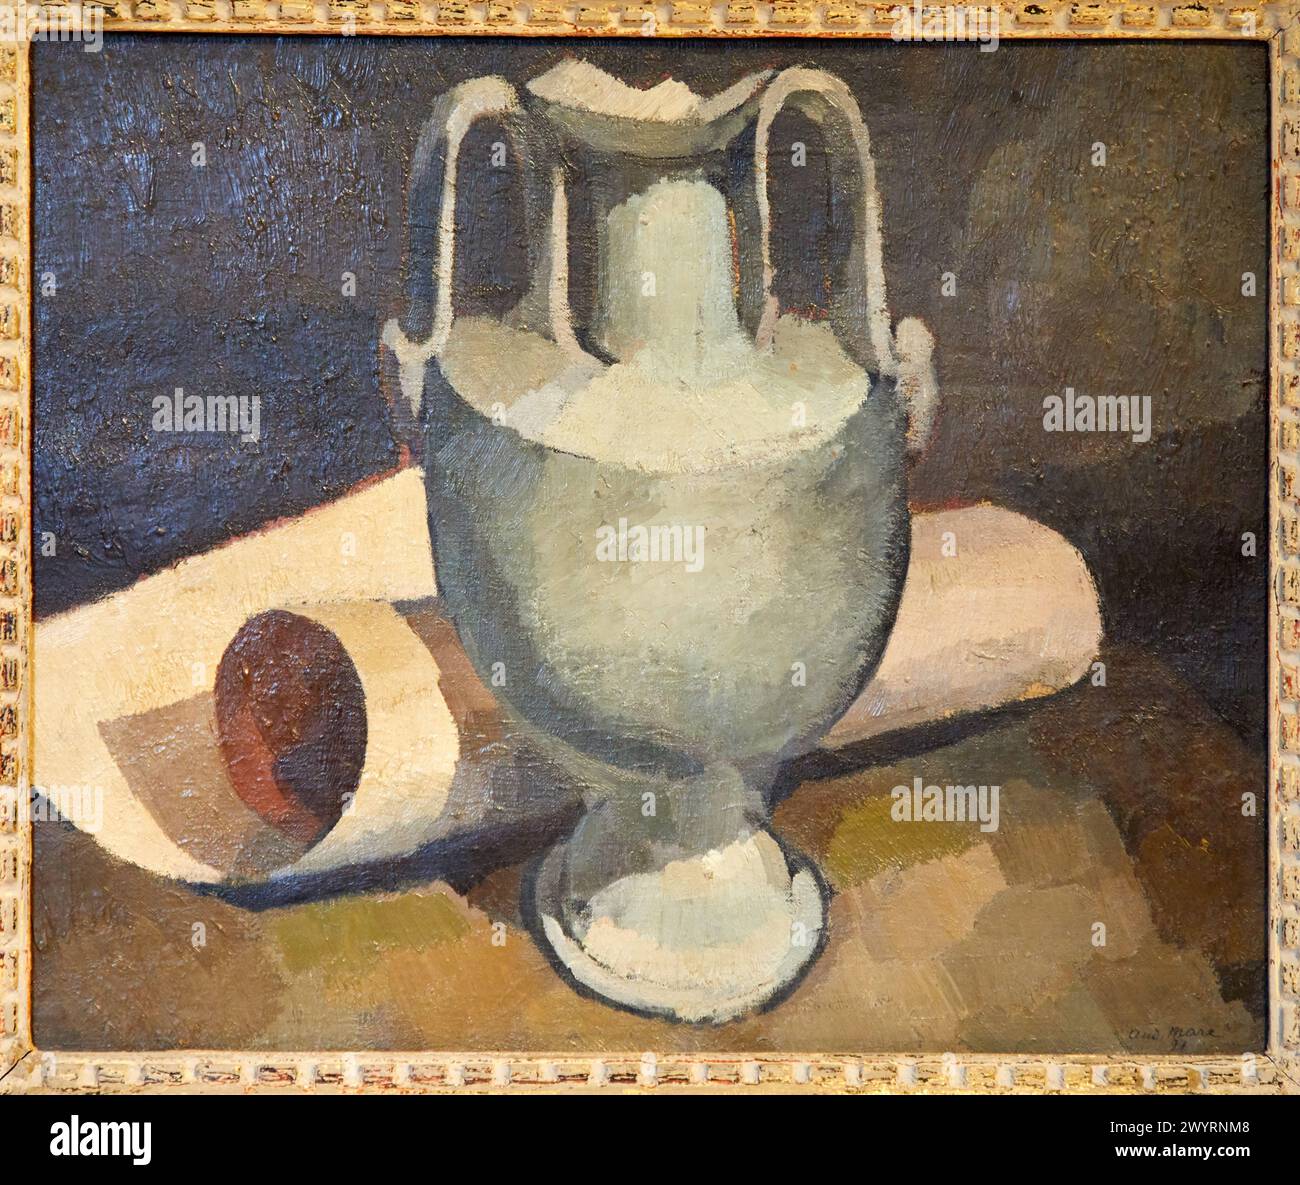 Nature Morte, 1921, André Mare, Musée d'Art Moderne, Troyes, Region Champagne-Ardenne, Aube, Frankreich, Europa Stockfoto